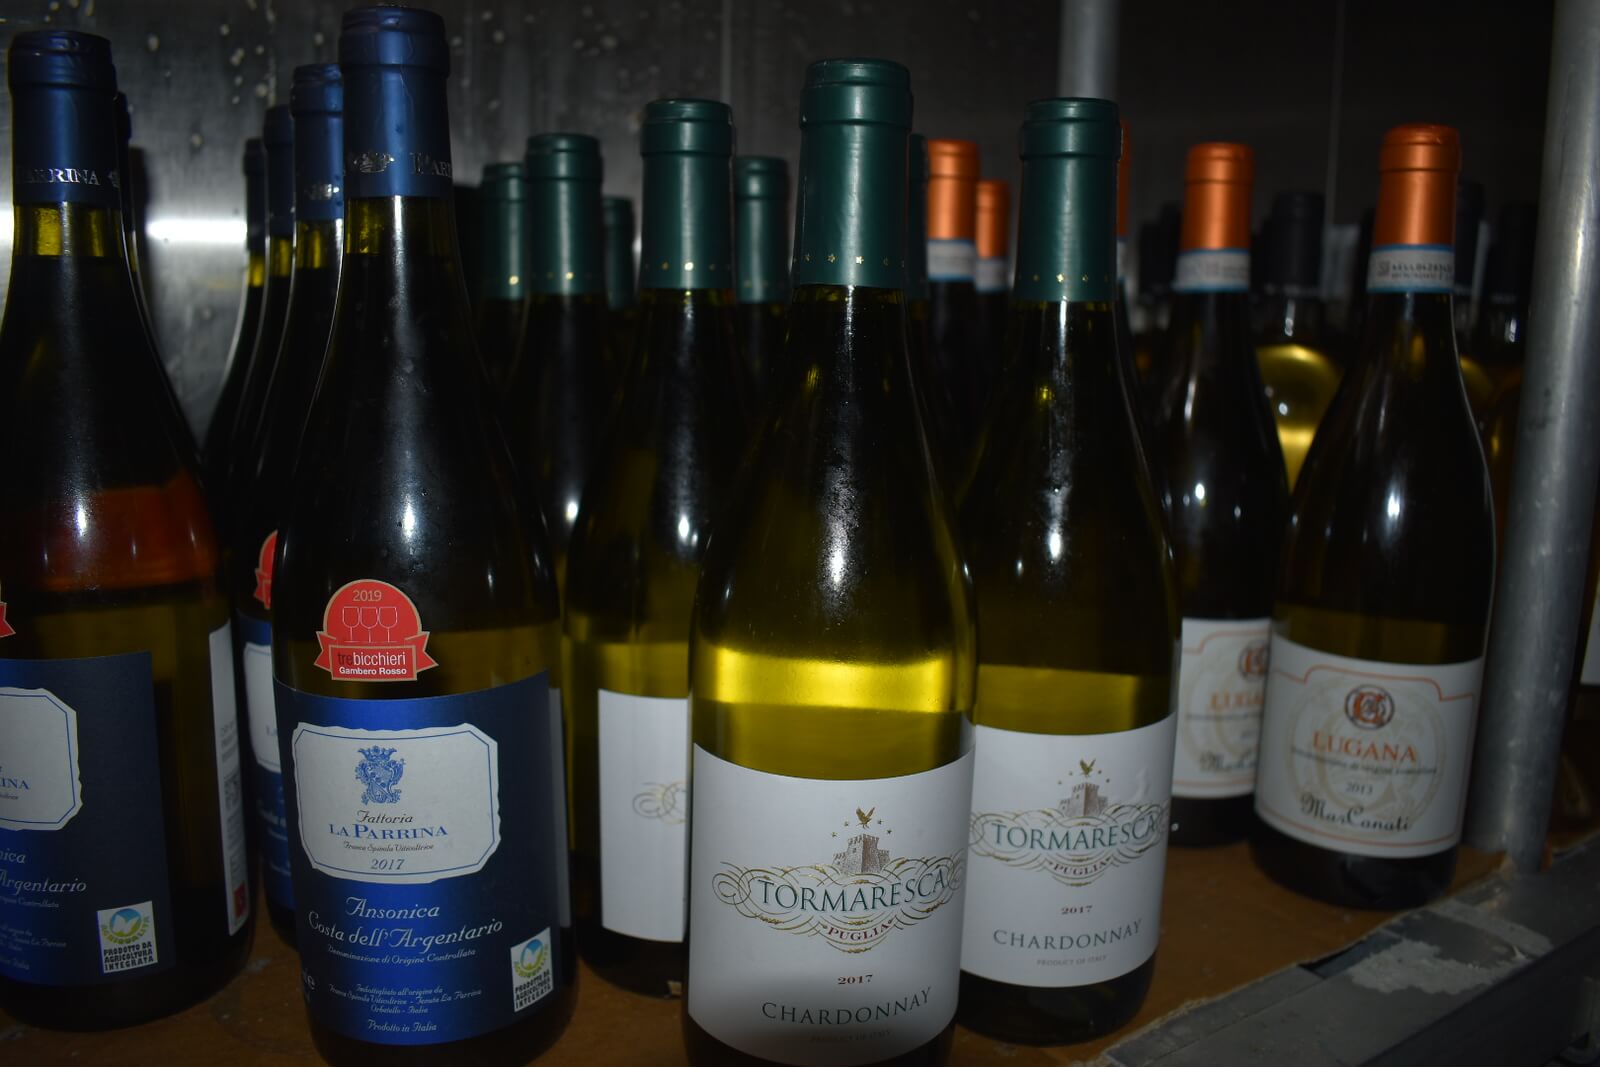 Bottles of wine available for purchase